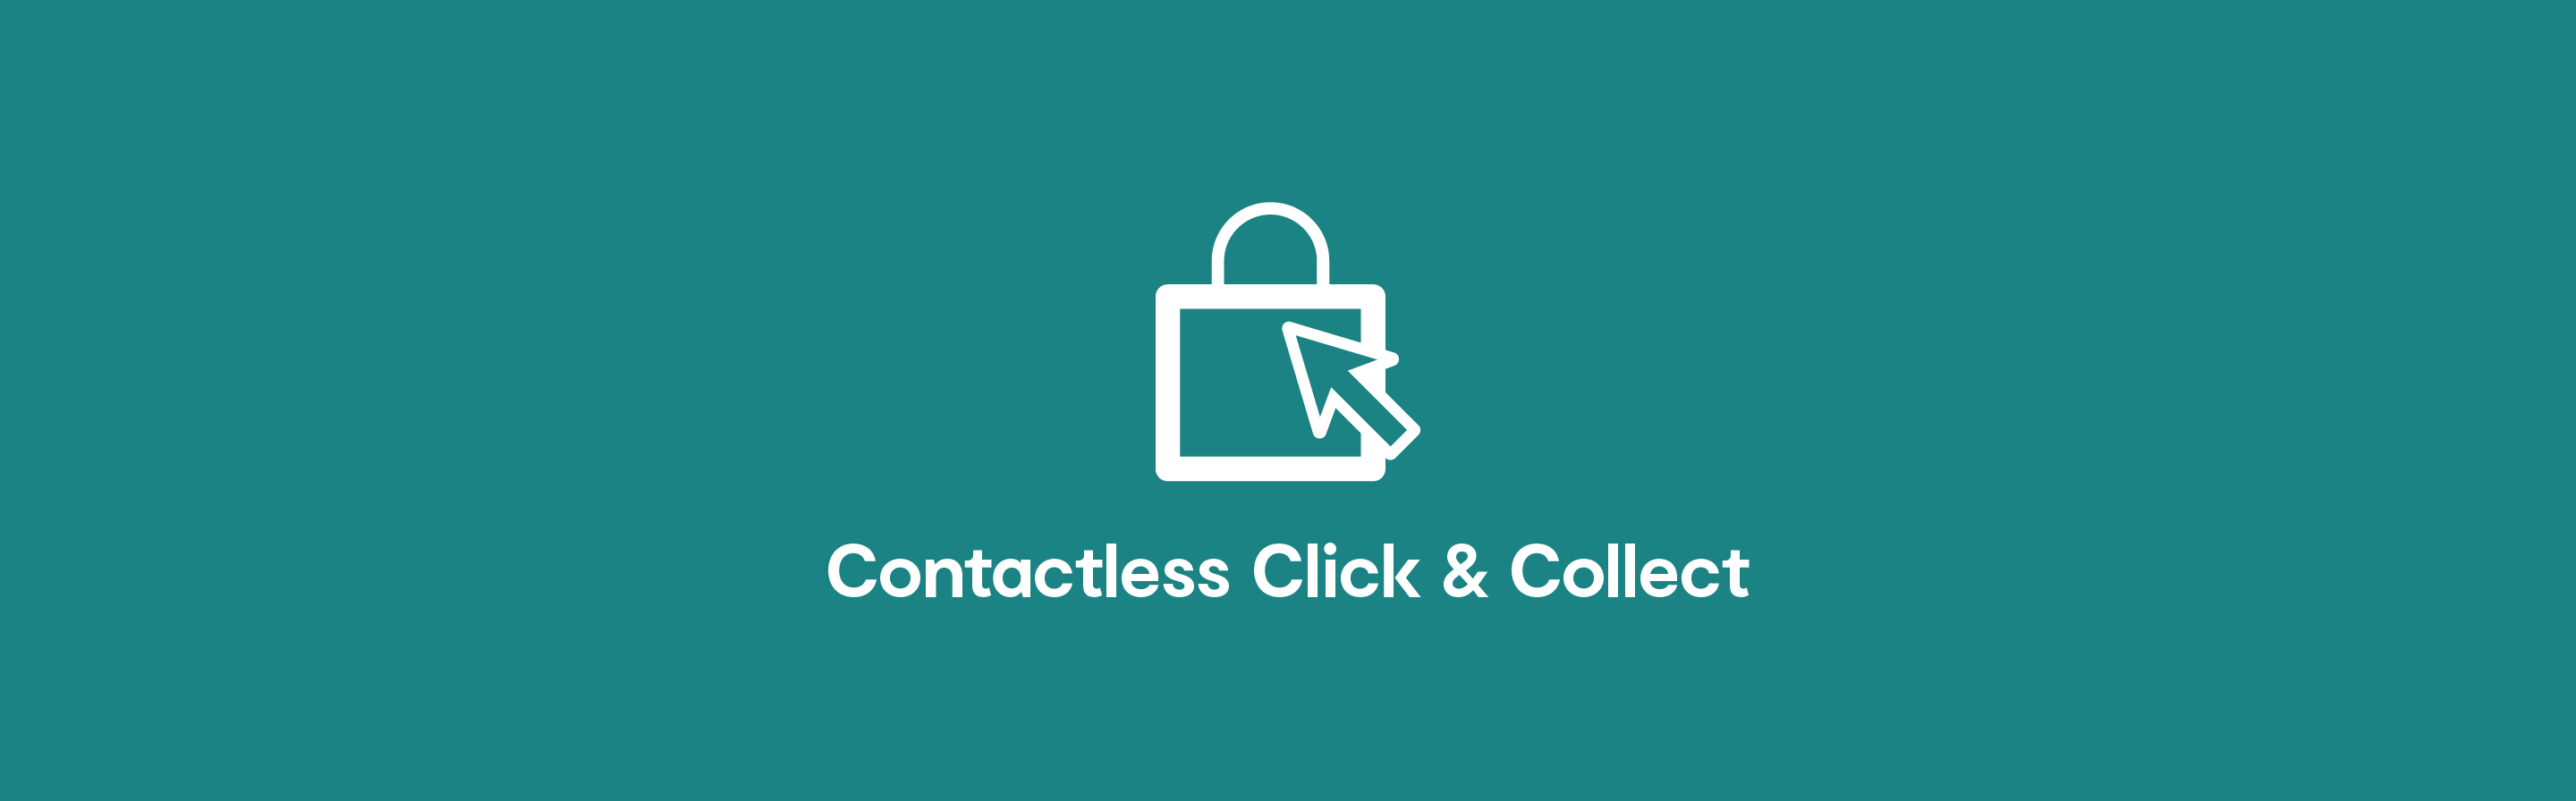 Contactless click and collect